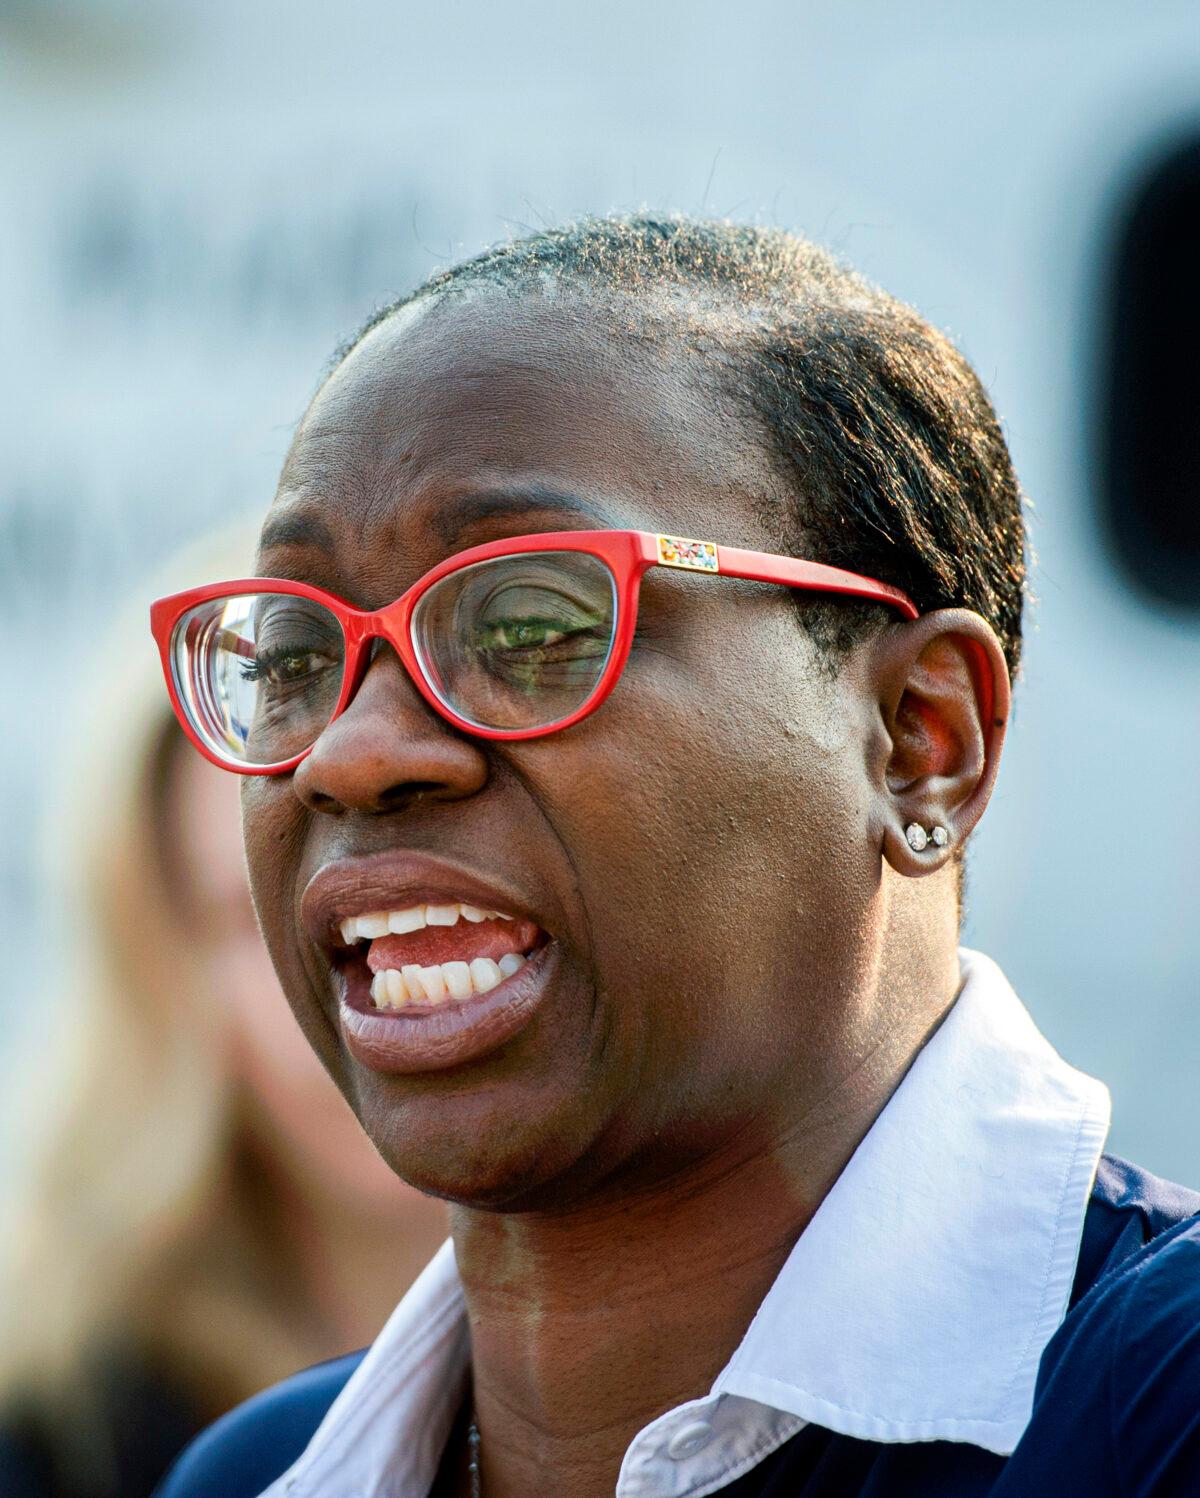 Nina Turner, a candidate running in a special Democratic primary election for Ohio's 11th Congressional District speaks with supporters near the Cuyahoga County Board of Elections before casting her vote in Cleveland, Ohio, on July 7, 2021. (Phil Long/AP Photo)